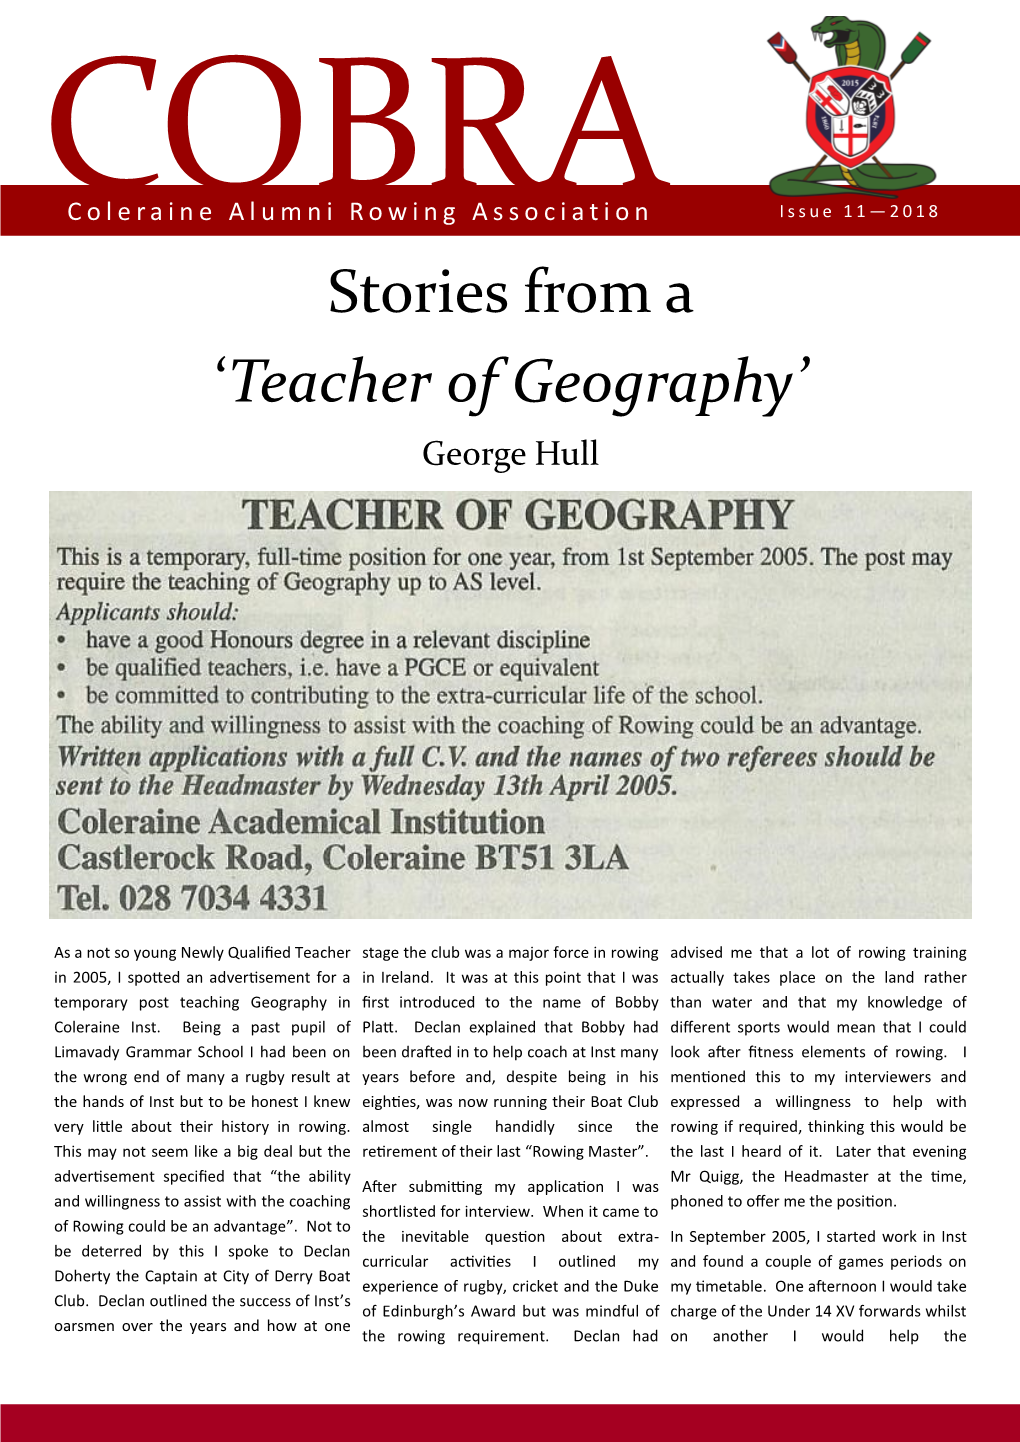 2018 Stories from a ‘Teacher of Geography’ George Hull